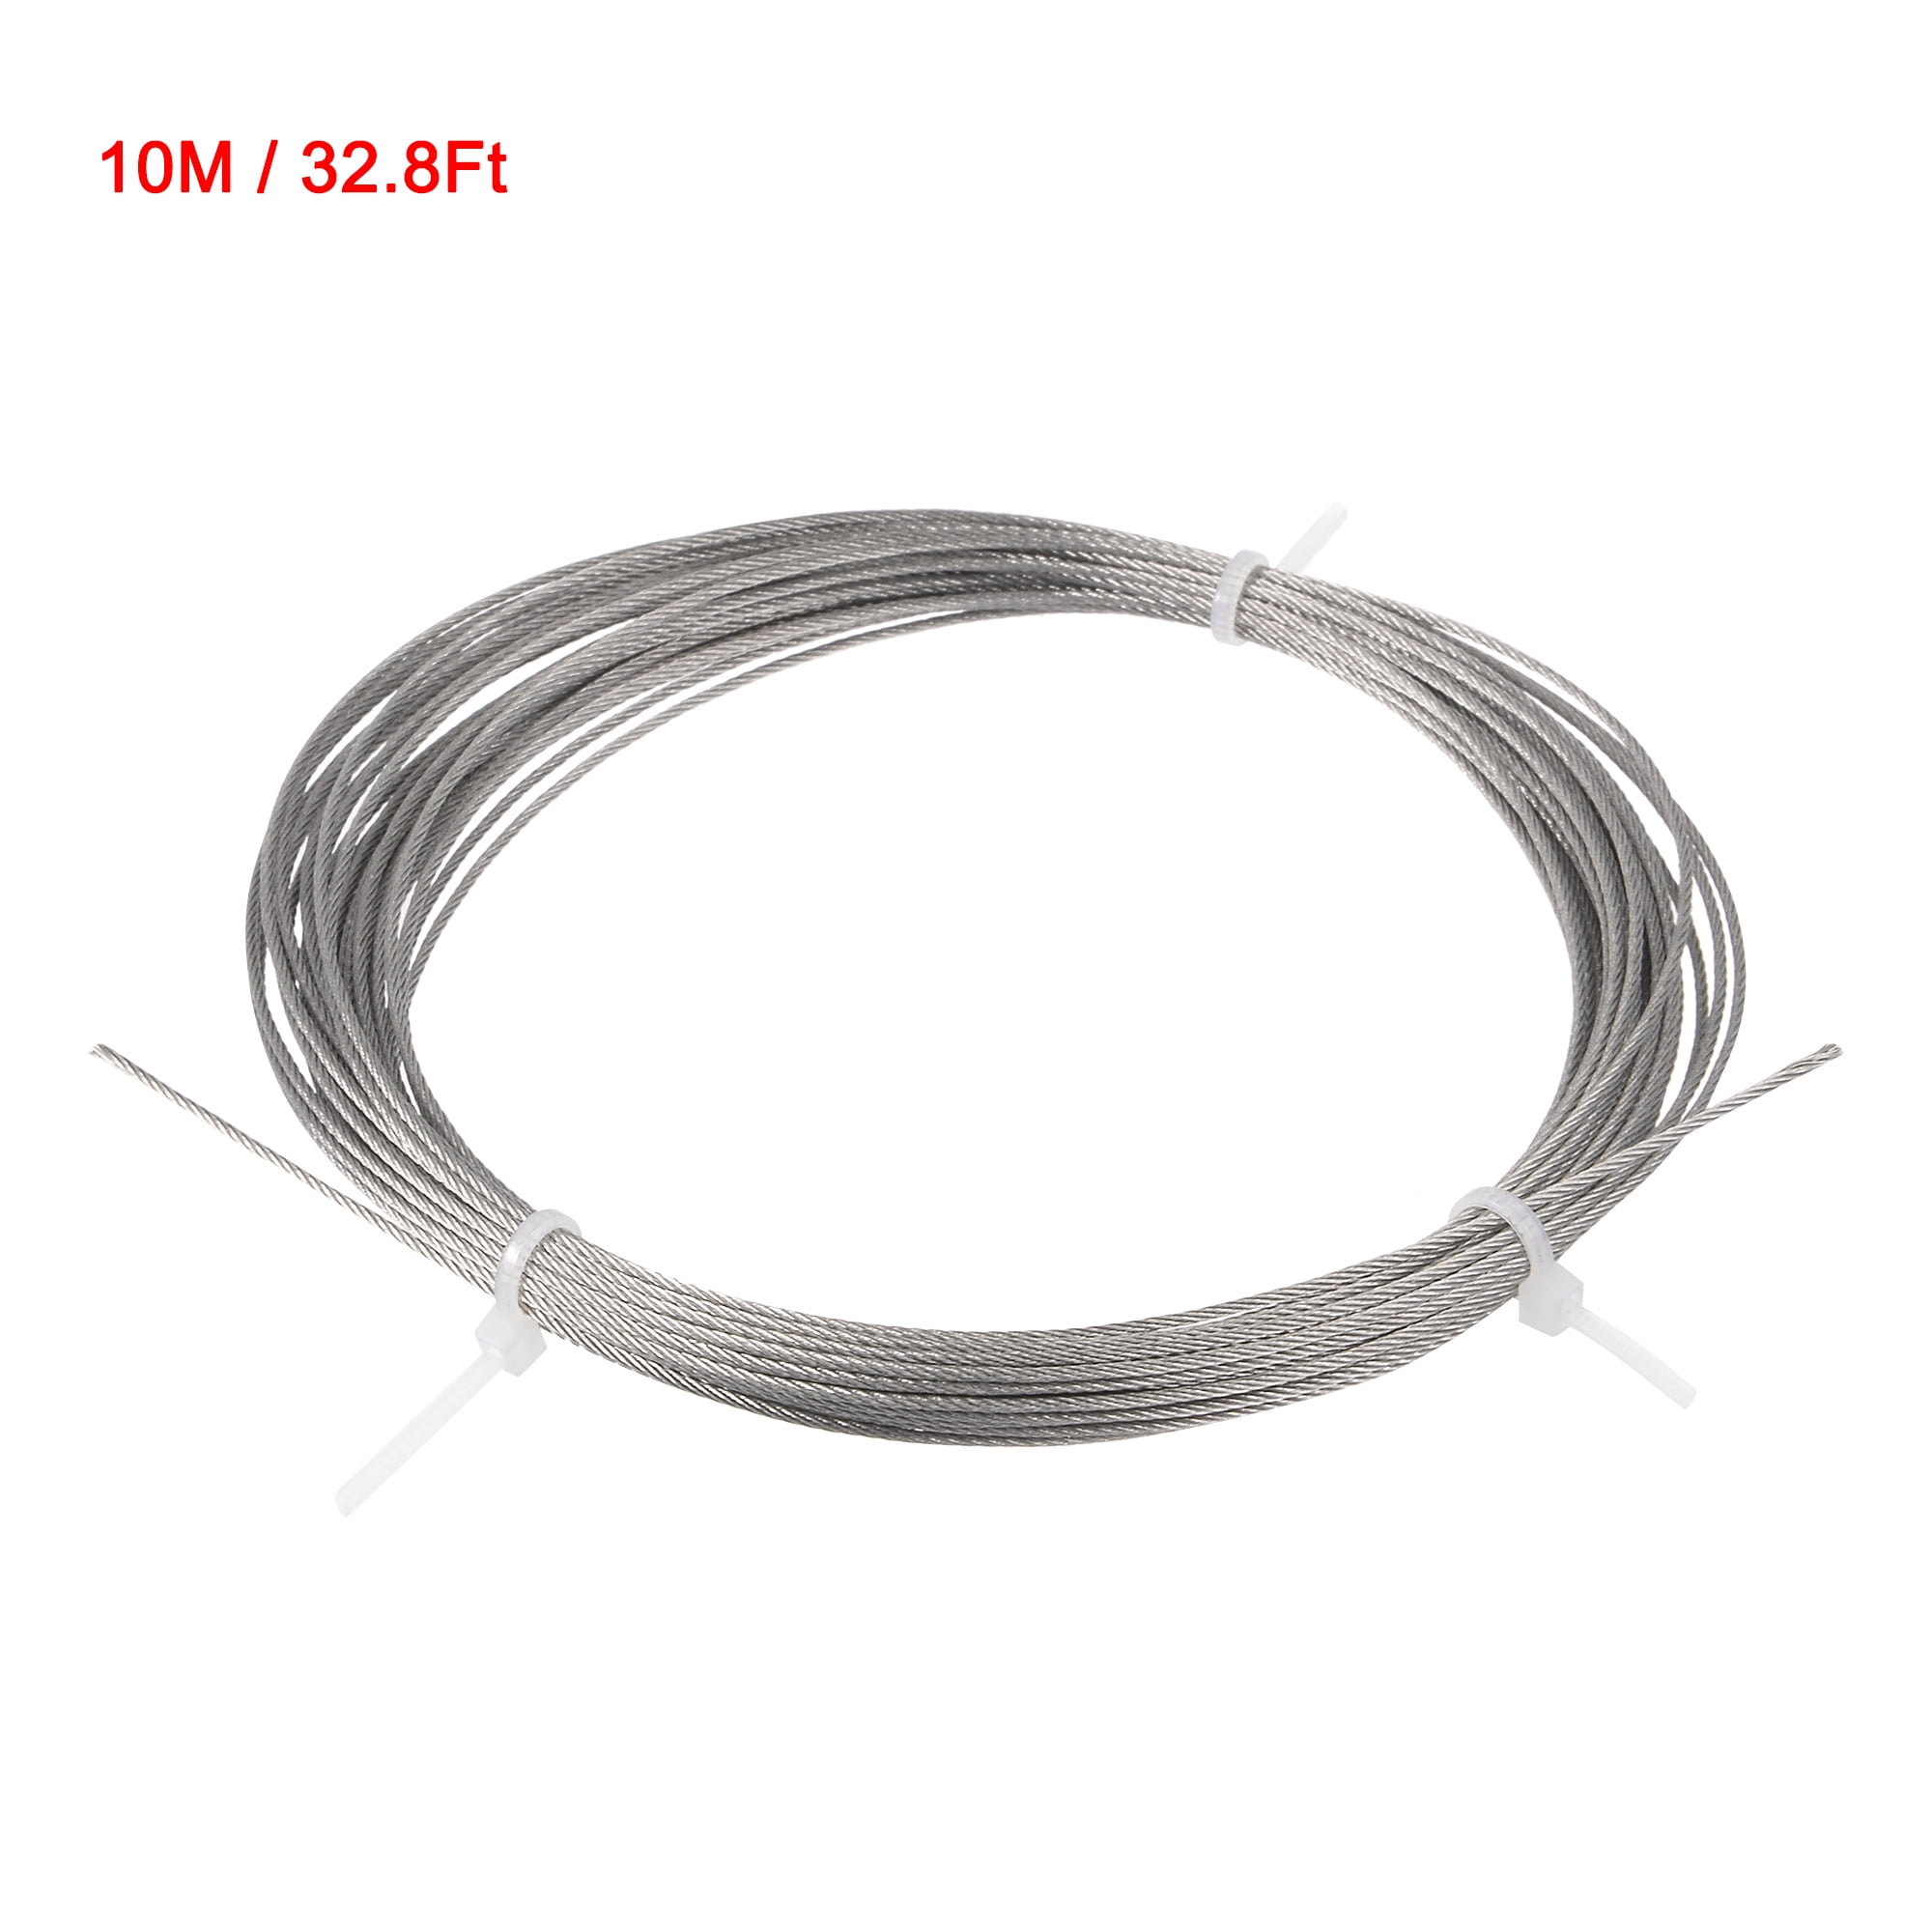 Grinding Machine Grinder 10m x 2mm Stainless Steel Wire Rope Cable Gray LW 